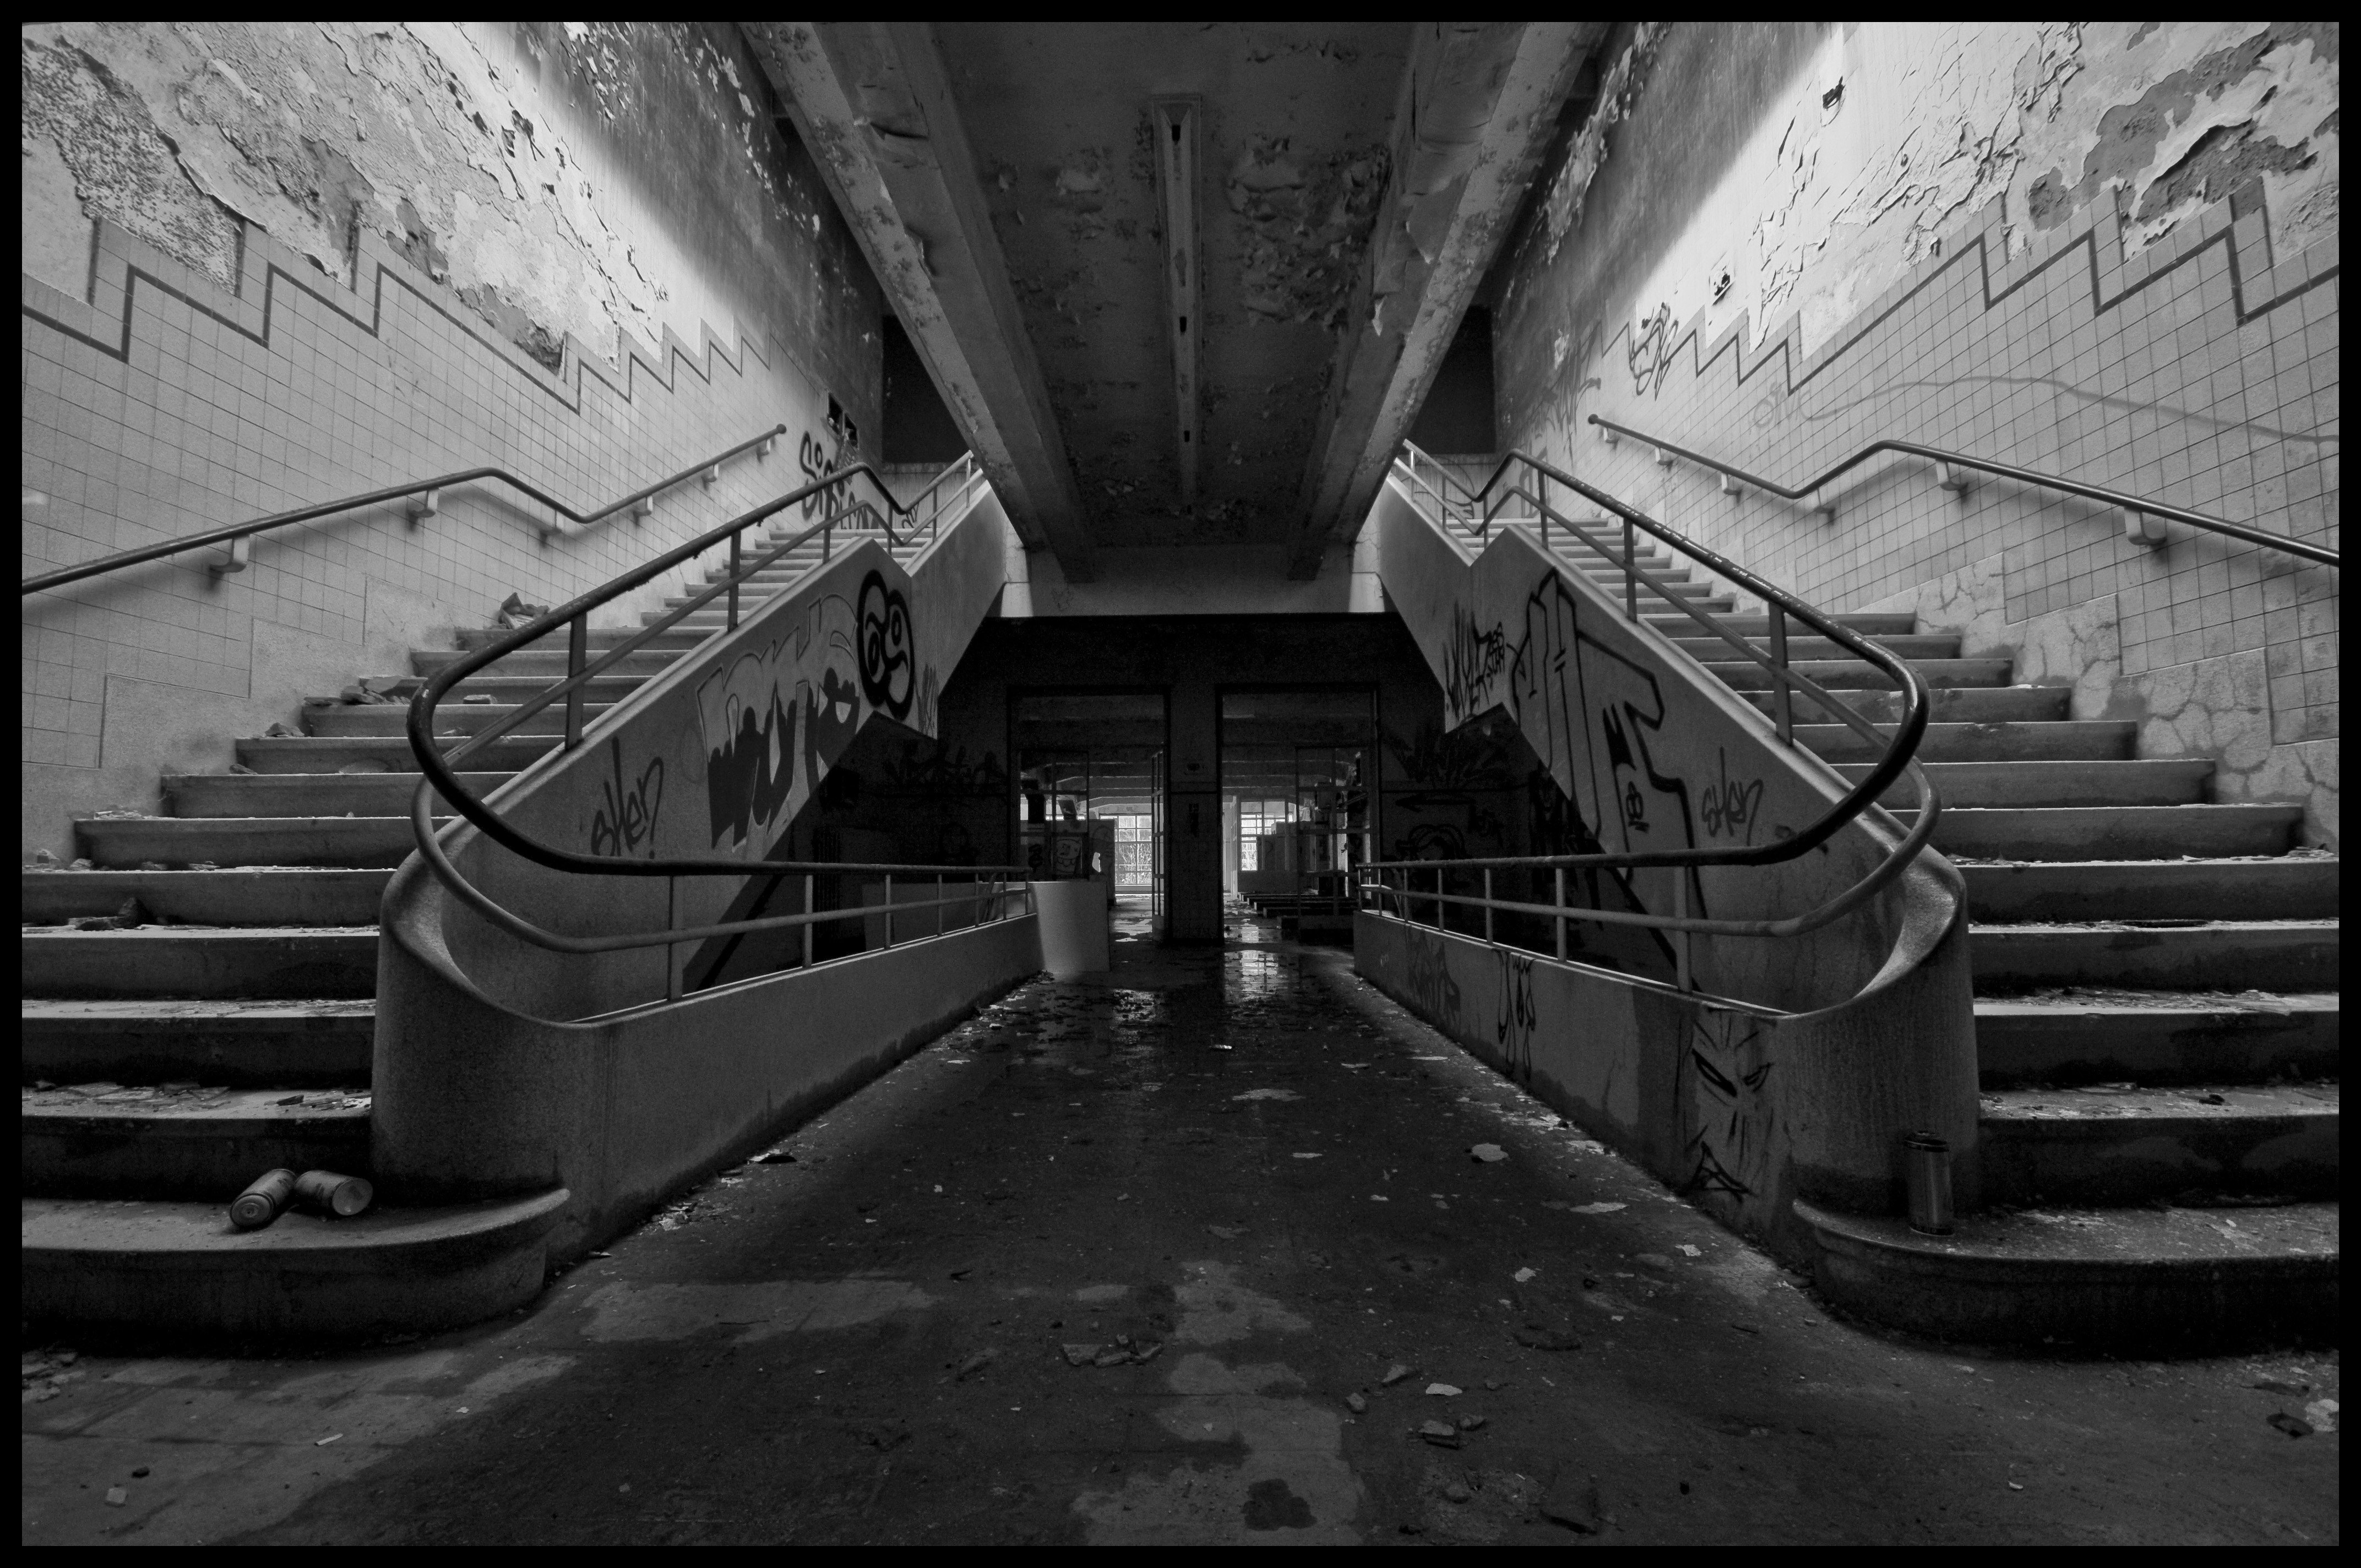 stairs, Monochrome, Train station, Abandoned, Ruin Wallpaper